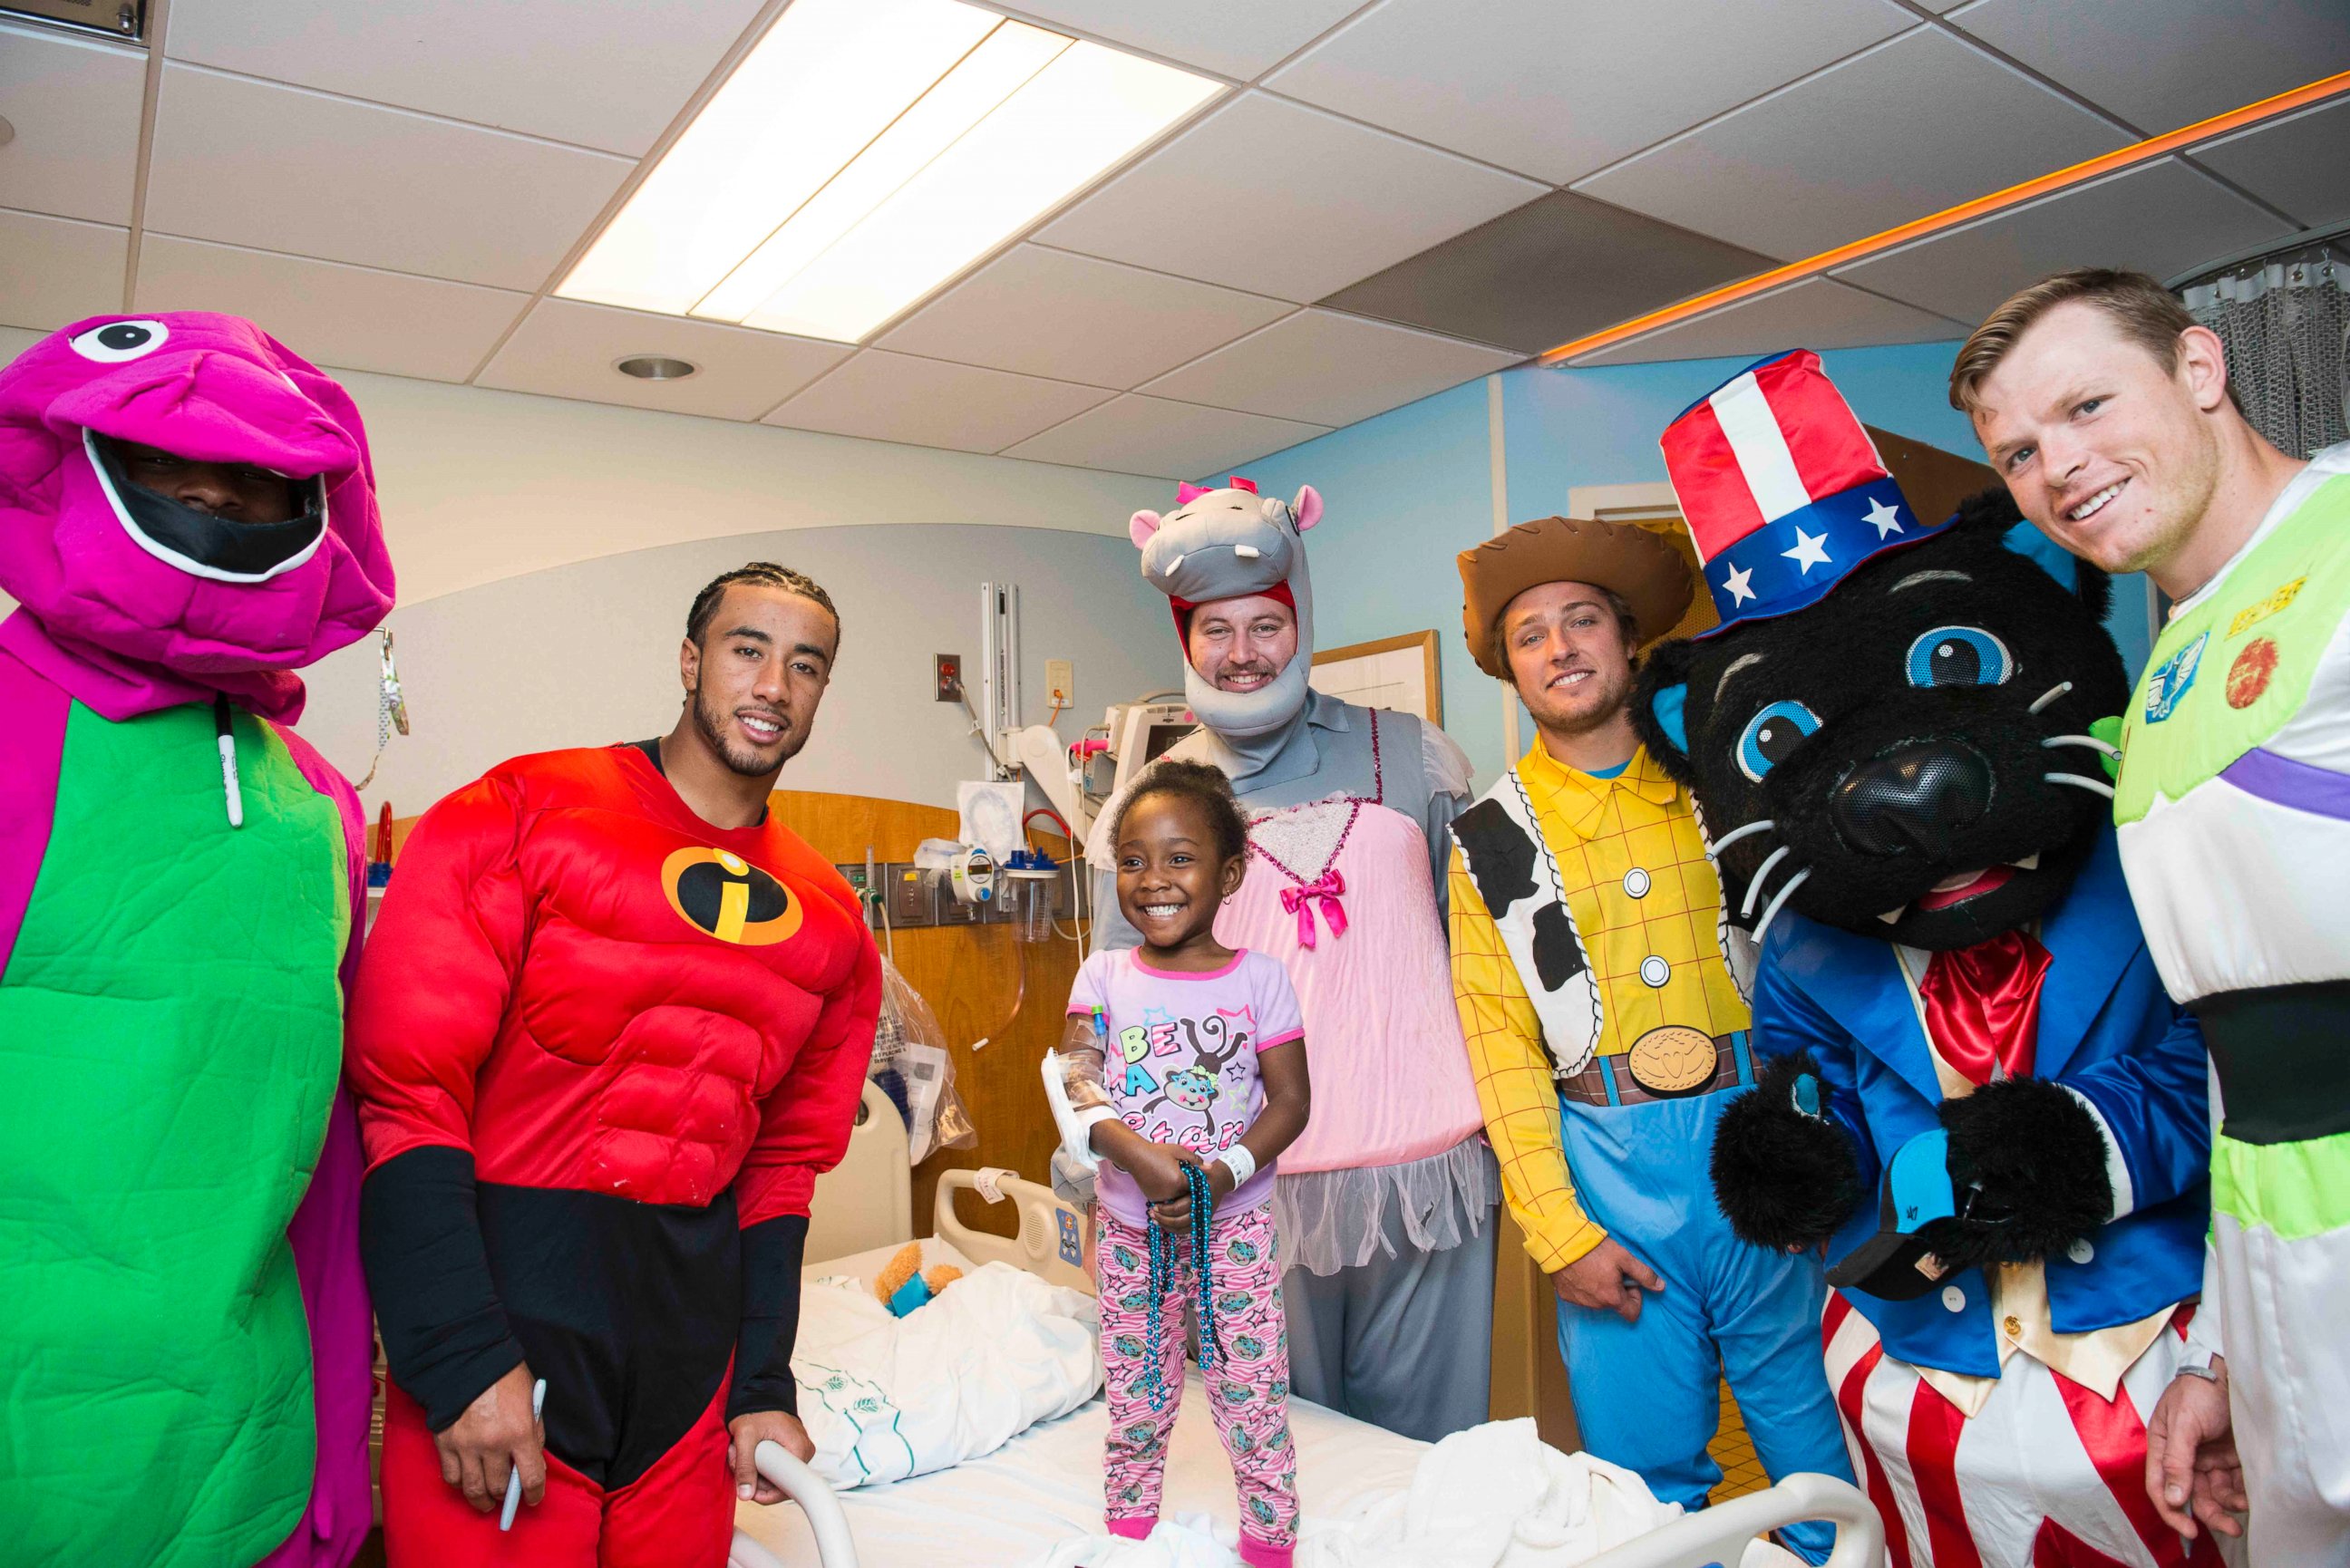 PHOTO: The Carolina Panthers' rookie class traded their football uniforms for Halloween costumes to visit families at a local children's hospital.